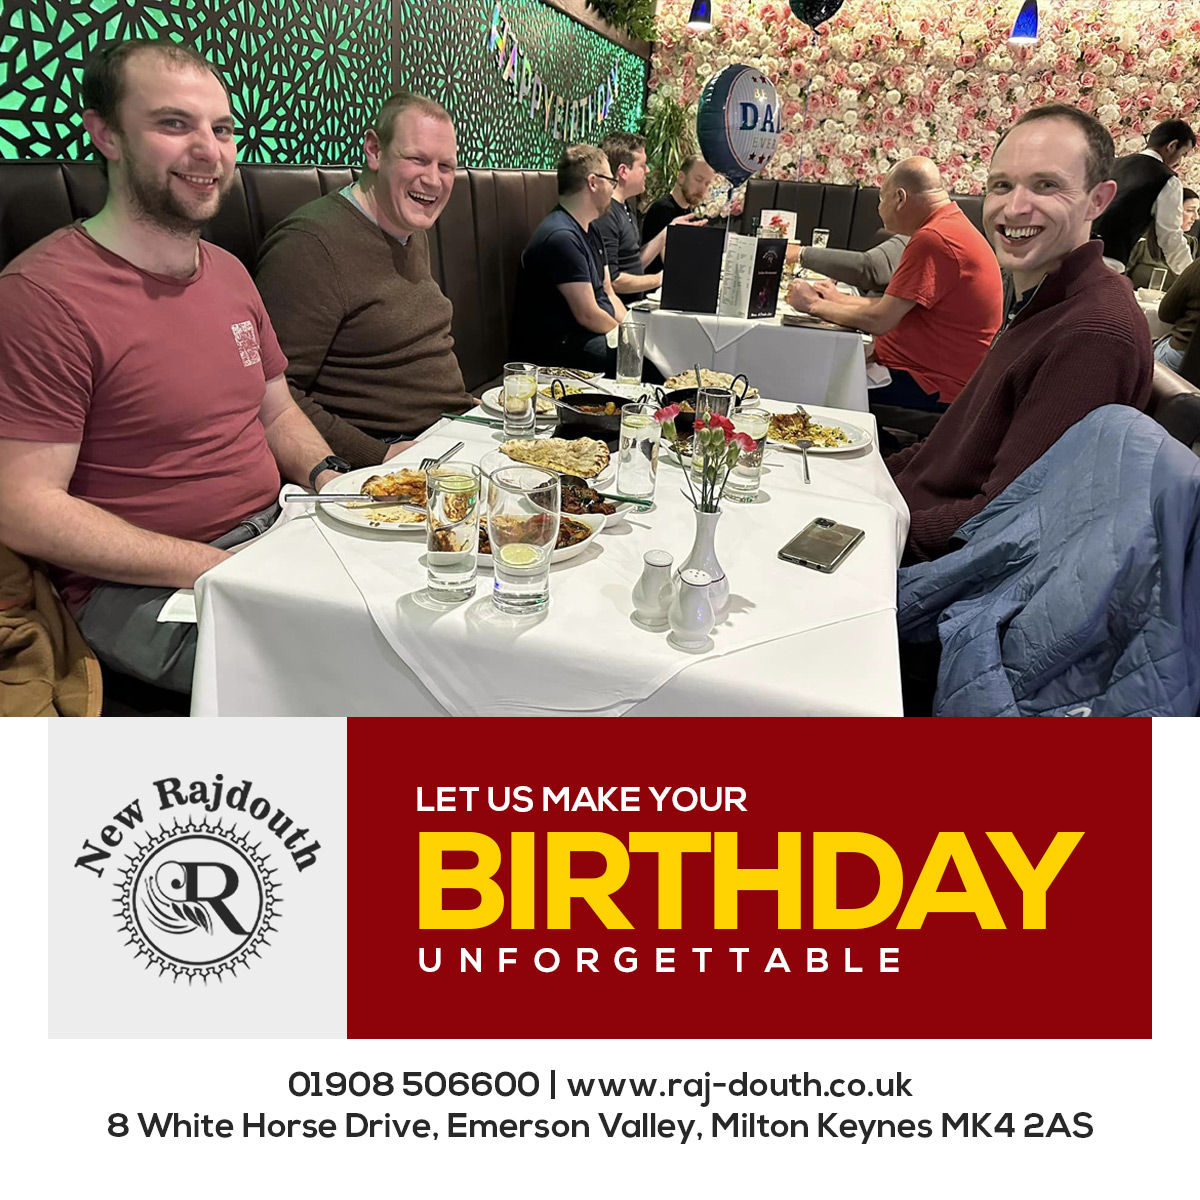 Your birthday deserves to be celebrated in style, and our restaurant is the perfect place to do just that! 💝 - - For Reservations: ☎️ 01908 506600 🌐 raj-douth.co.uk 📌 8 White Horse Drive, Emerson Valley, Milton Keynes MK4 2AS - - - #birthdaycelebration #NewRajdouth